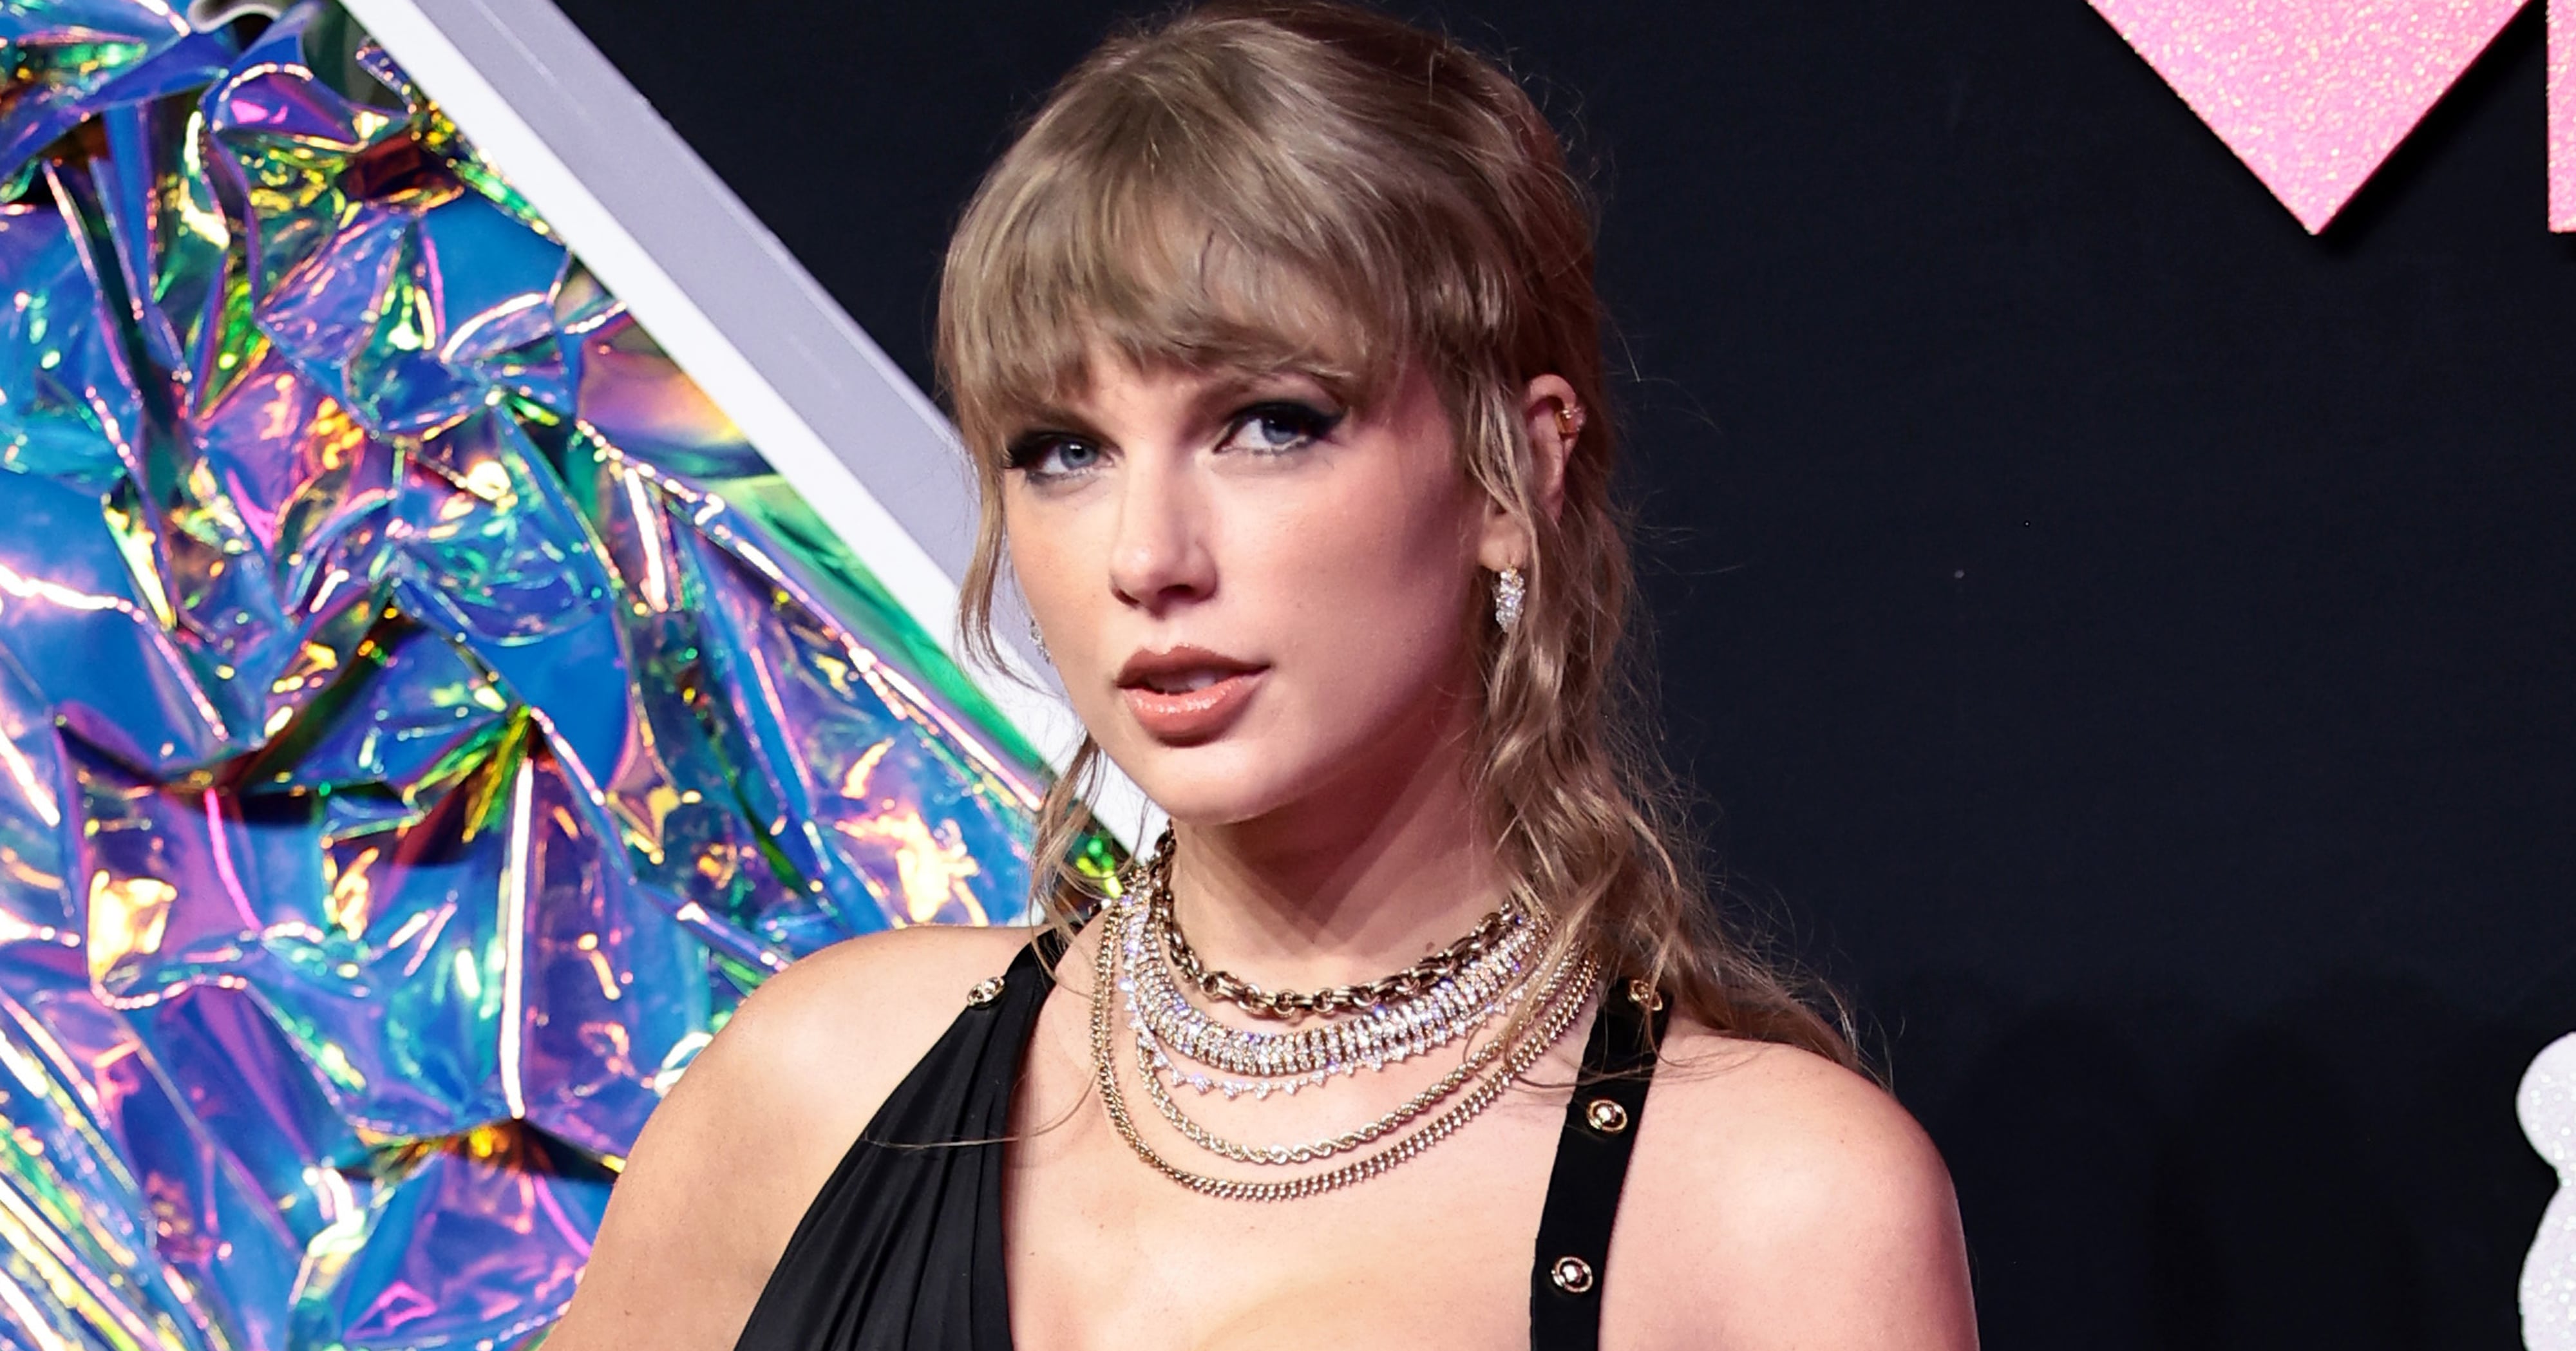 Taylor Swift Fuels “Reputation” Release Rumors With Her Edgy MTV